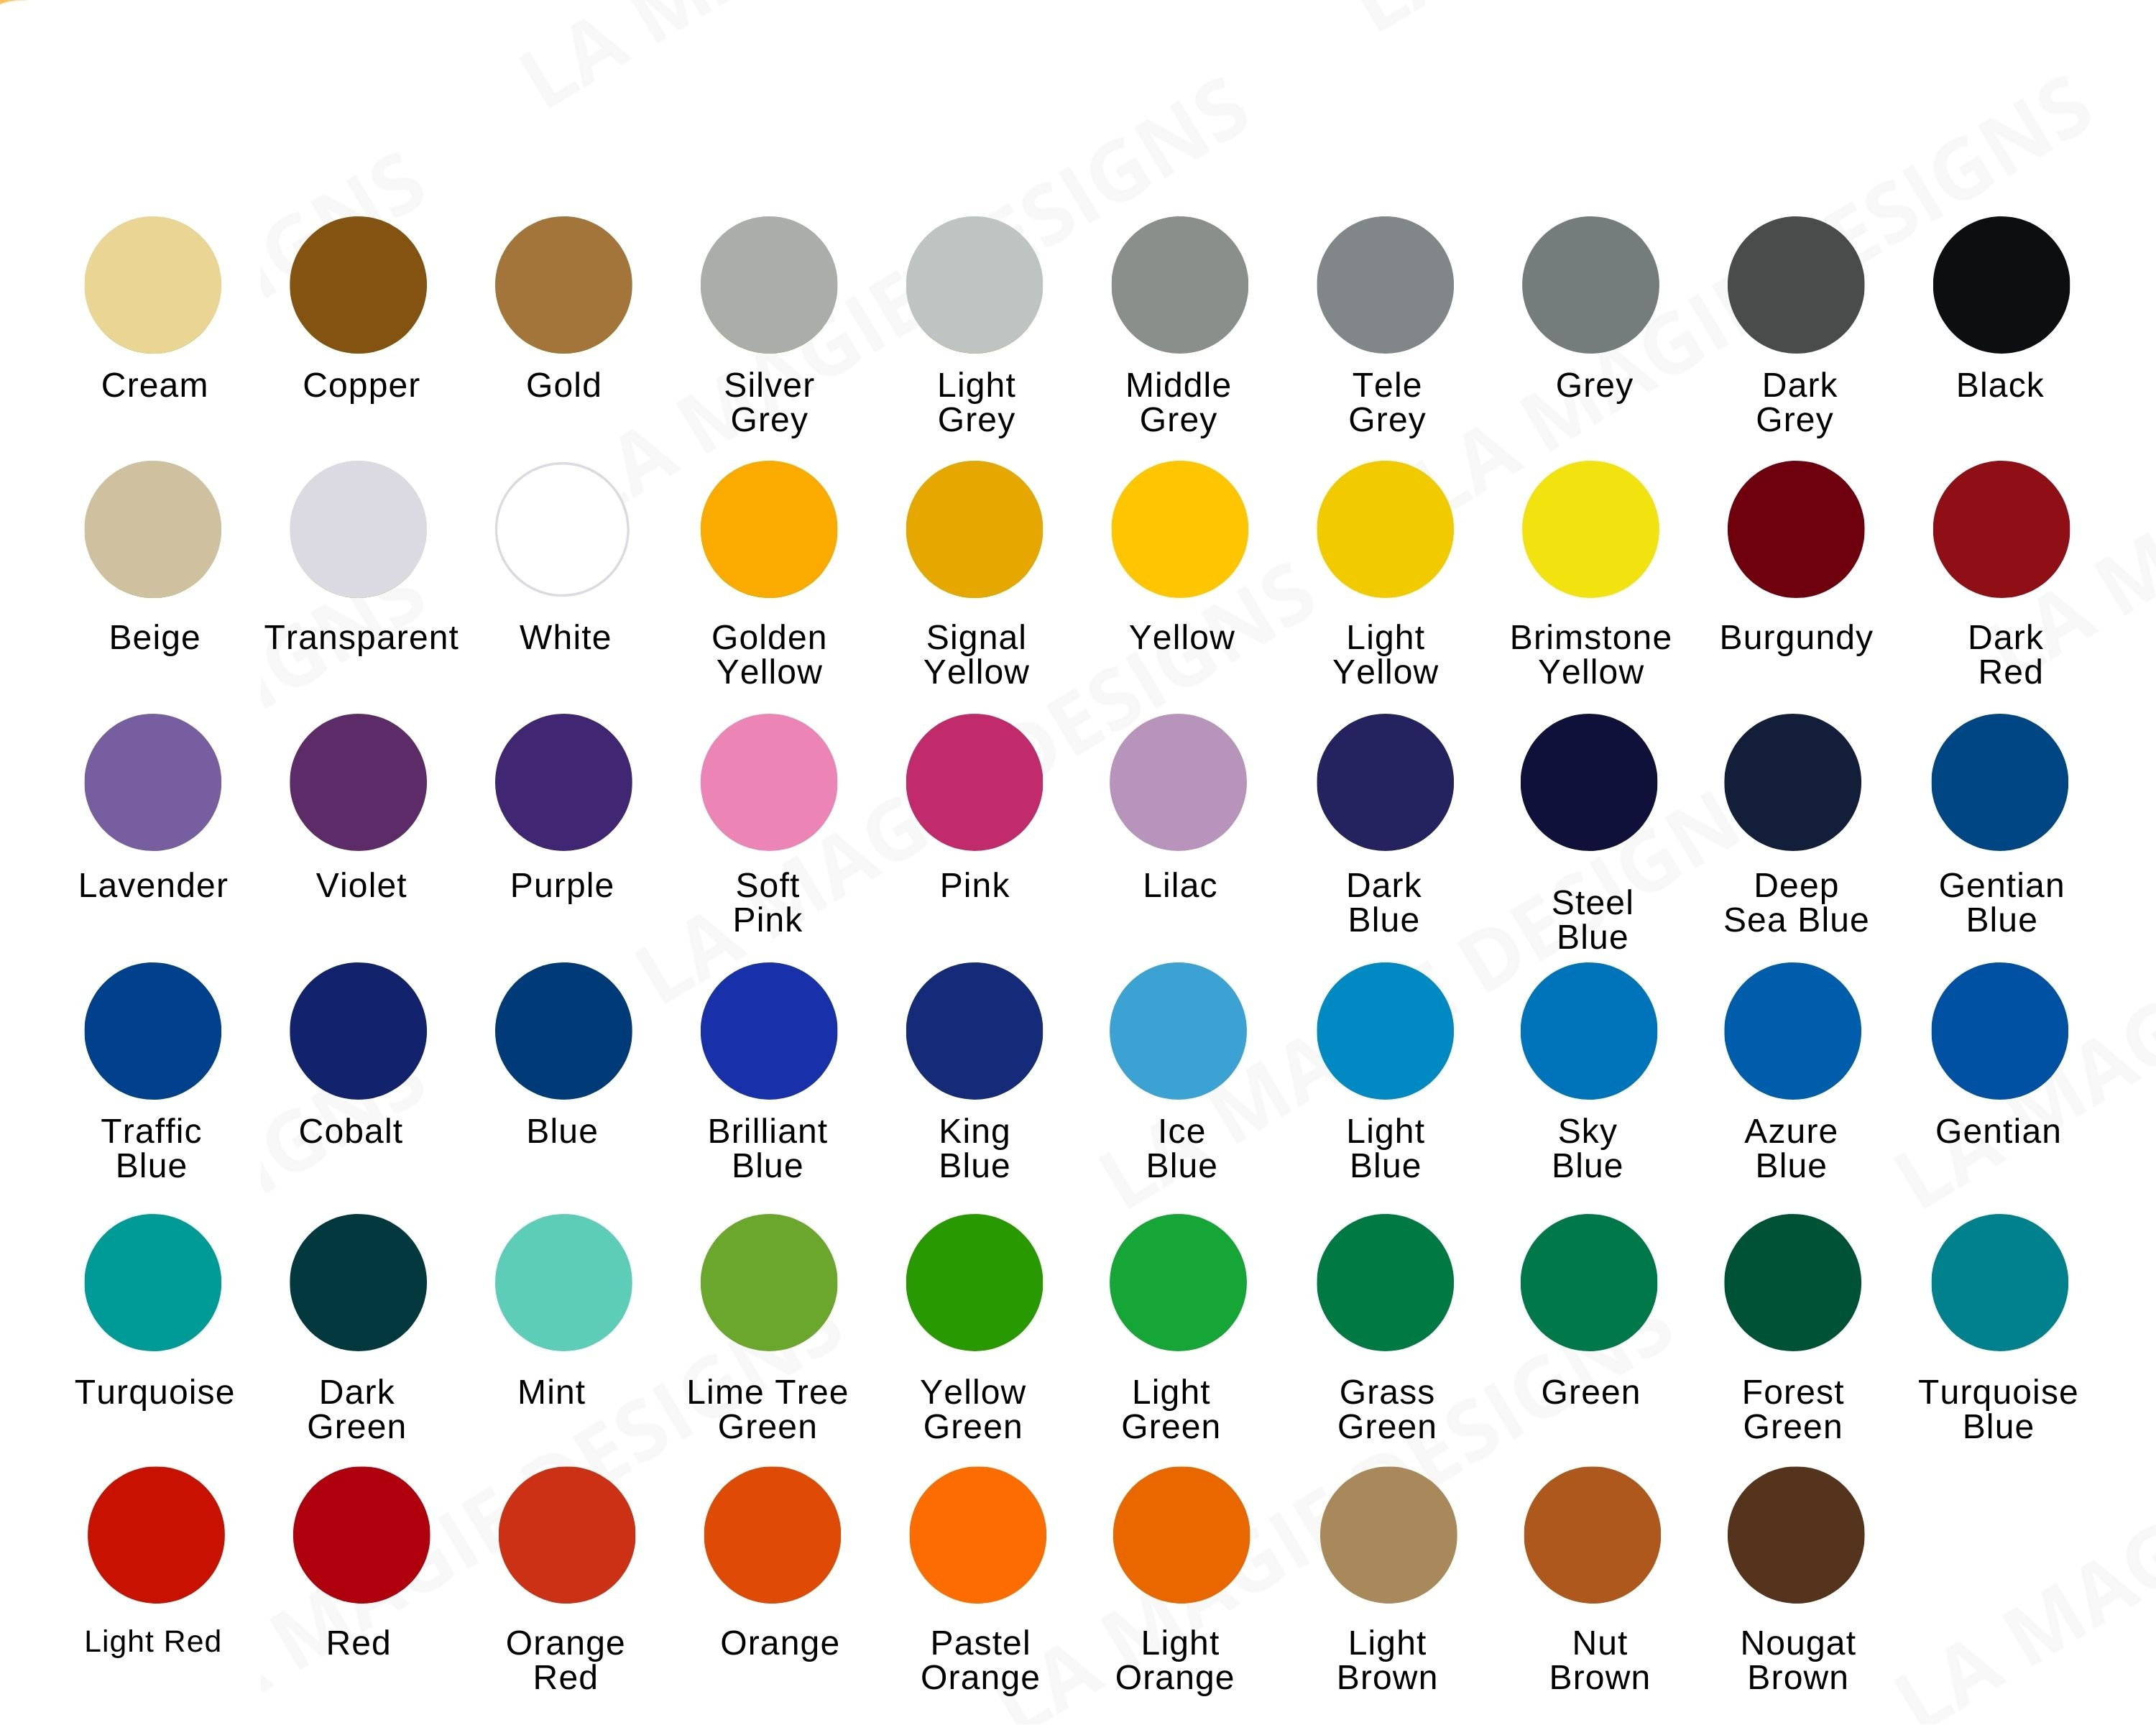 ORACAL 651 Color Chart Oracle 651 Permanent Vinyl Color Guide, 2 Ready to  Use Jpg's Fully Editable Canva Template, All Colors -  Denmark